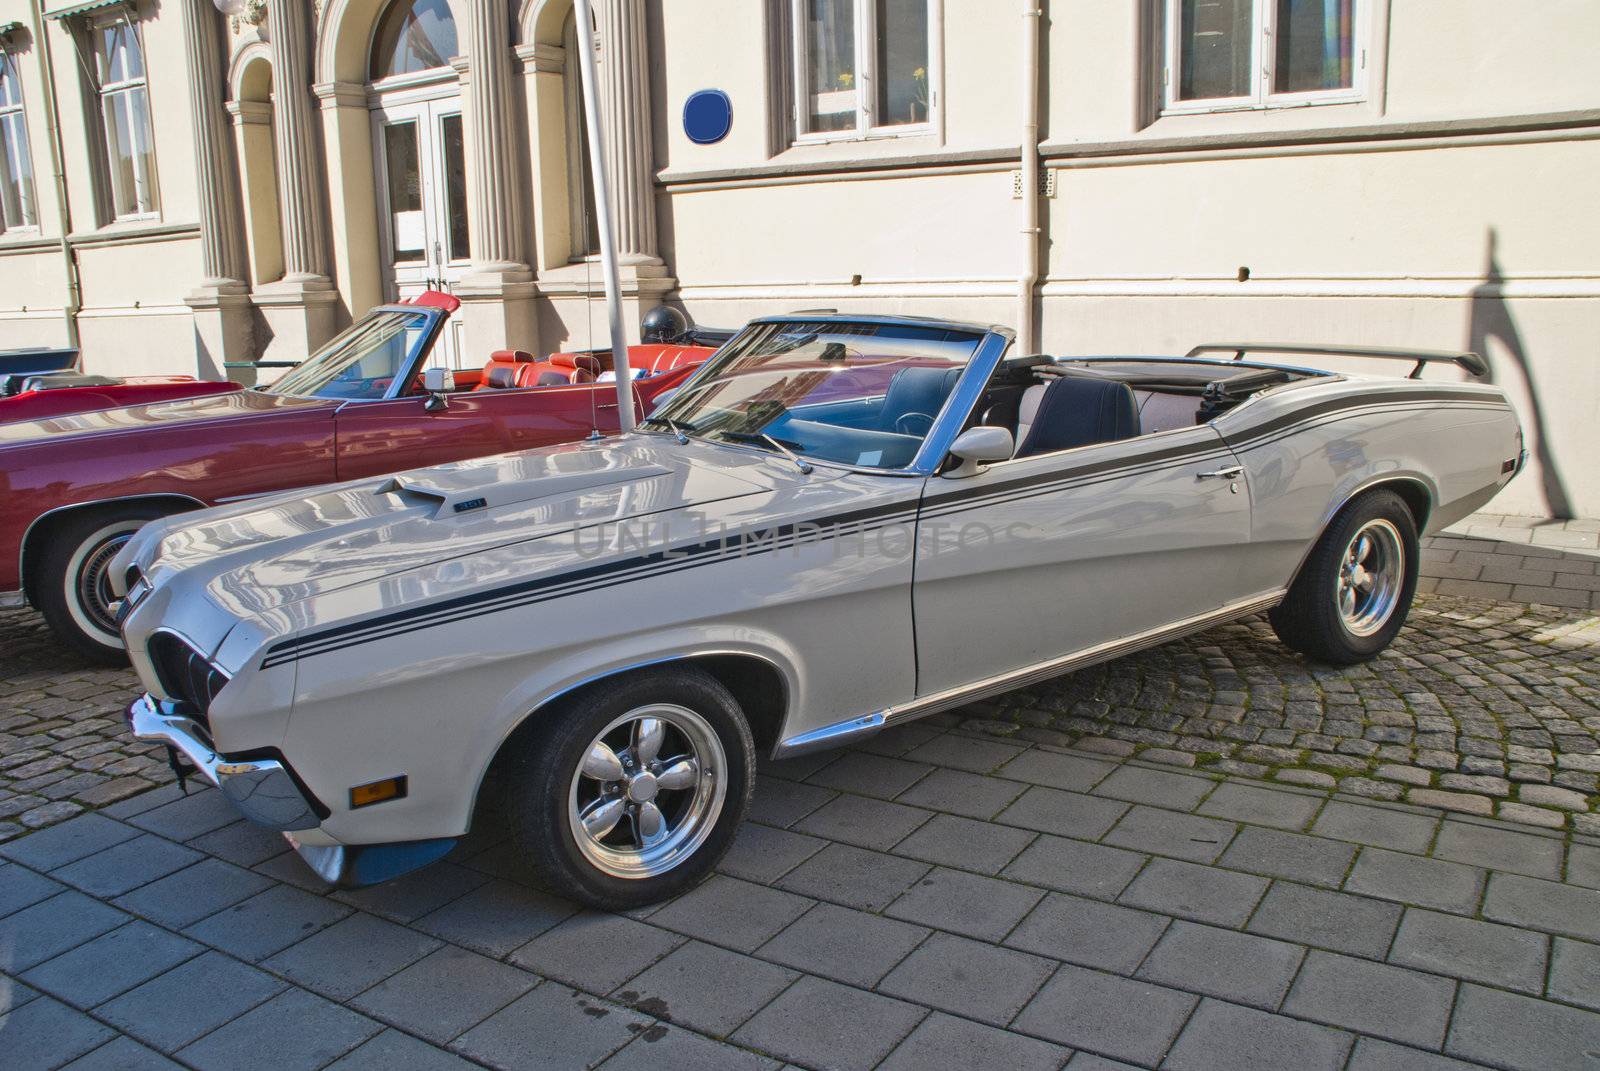 1970 mercury cougar xr7 convertible, angle 2 by steirus